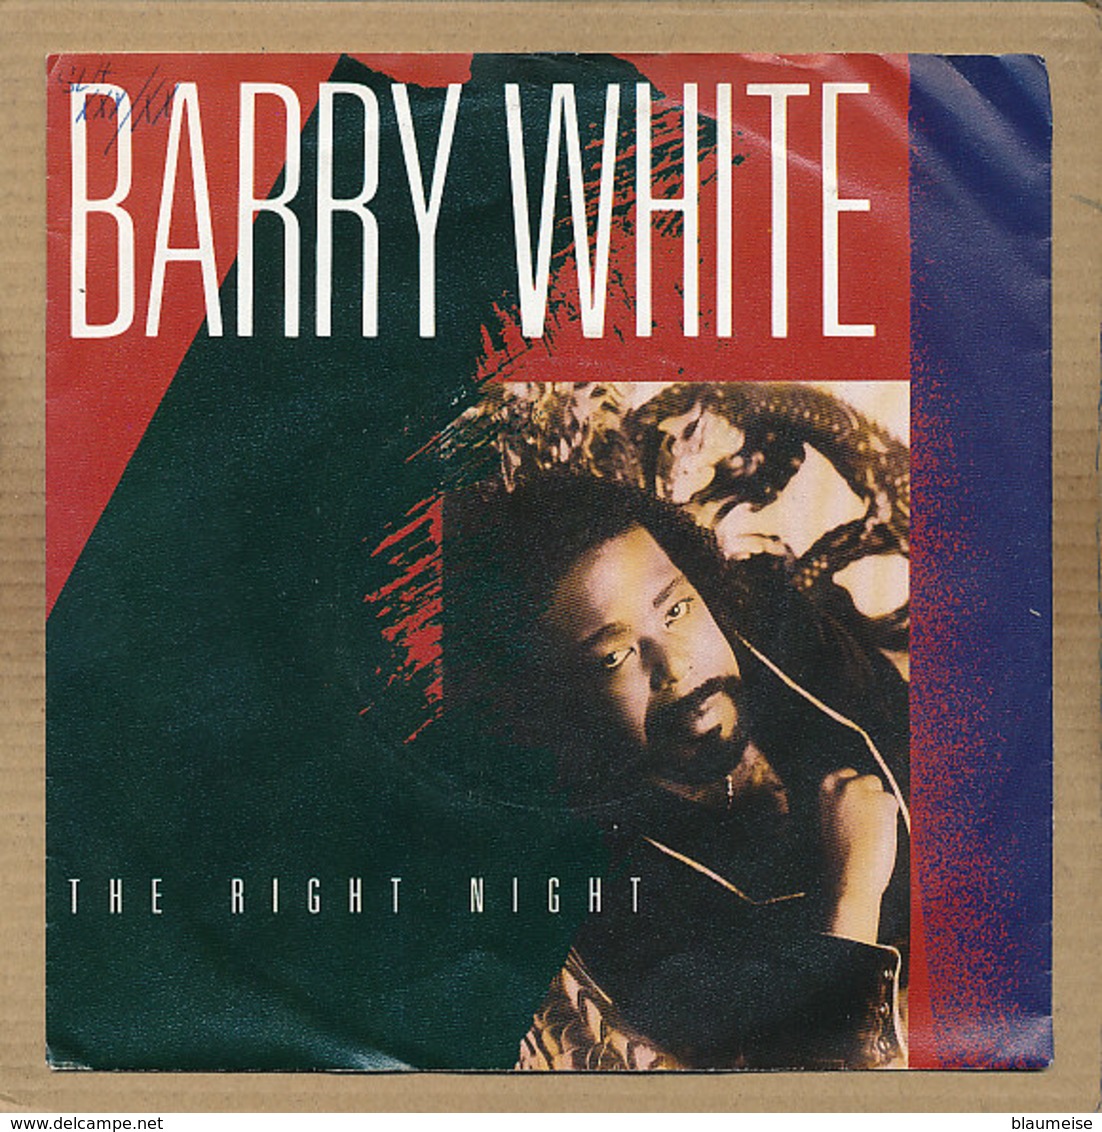 7" Single, Barry White, The Right Night - Disco, Pop